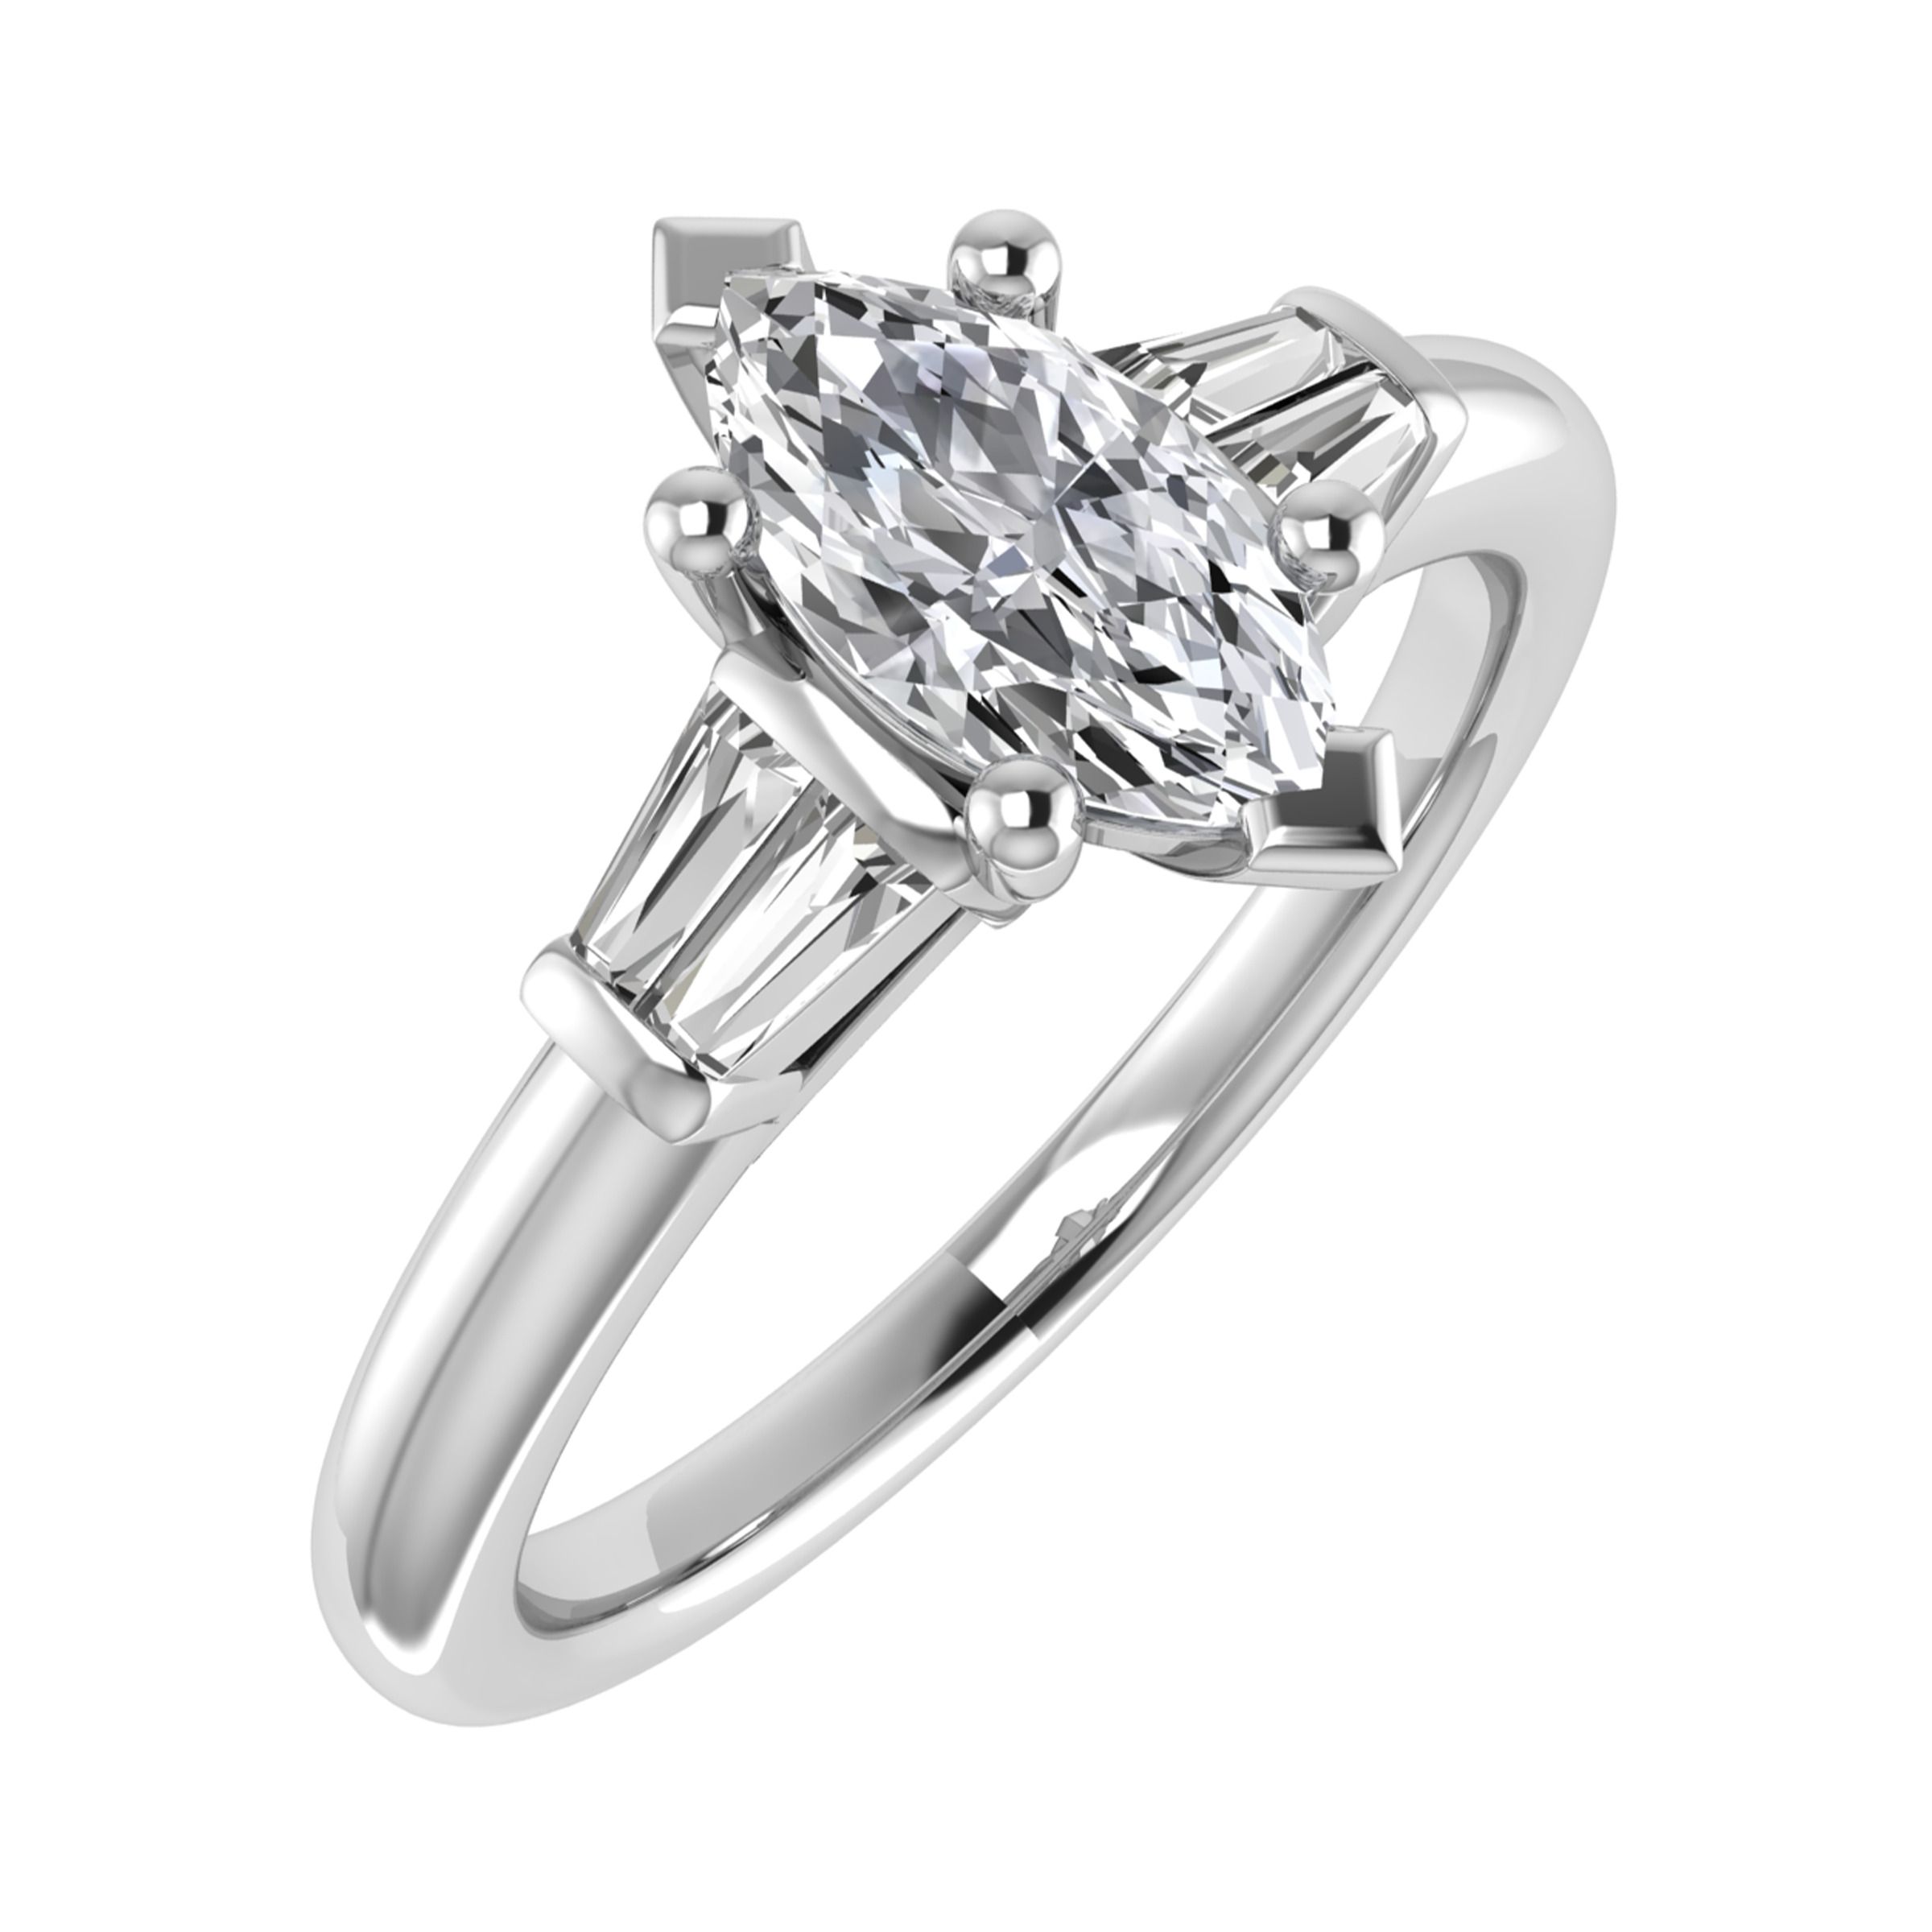 Patricia Marquise Cut Diamond Engagement Ring 